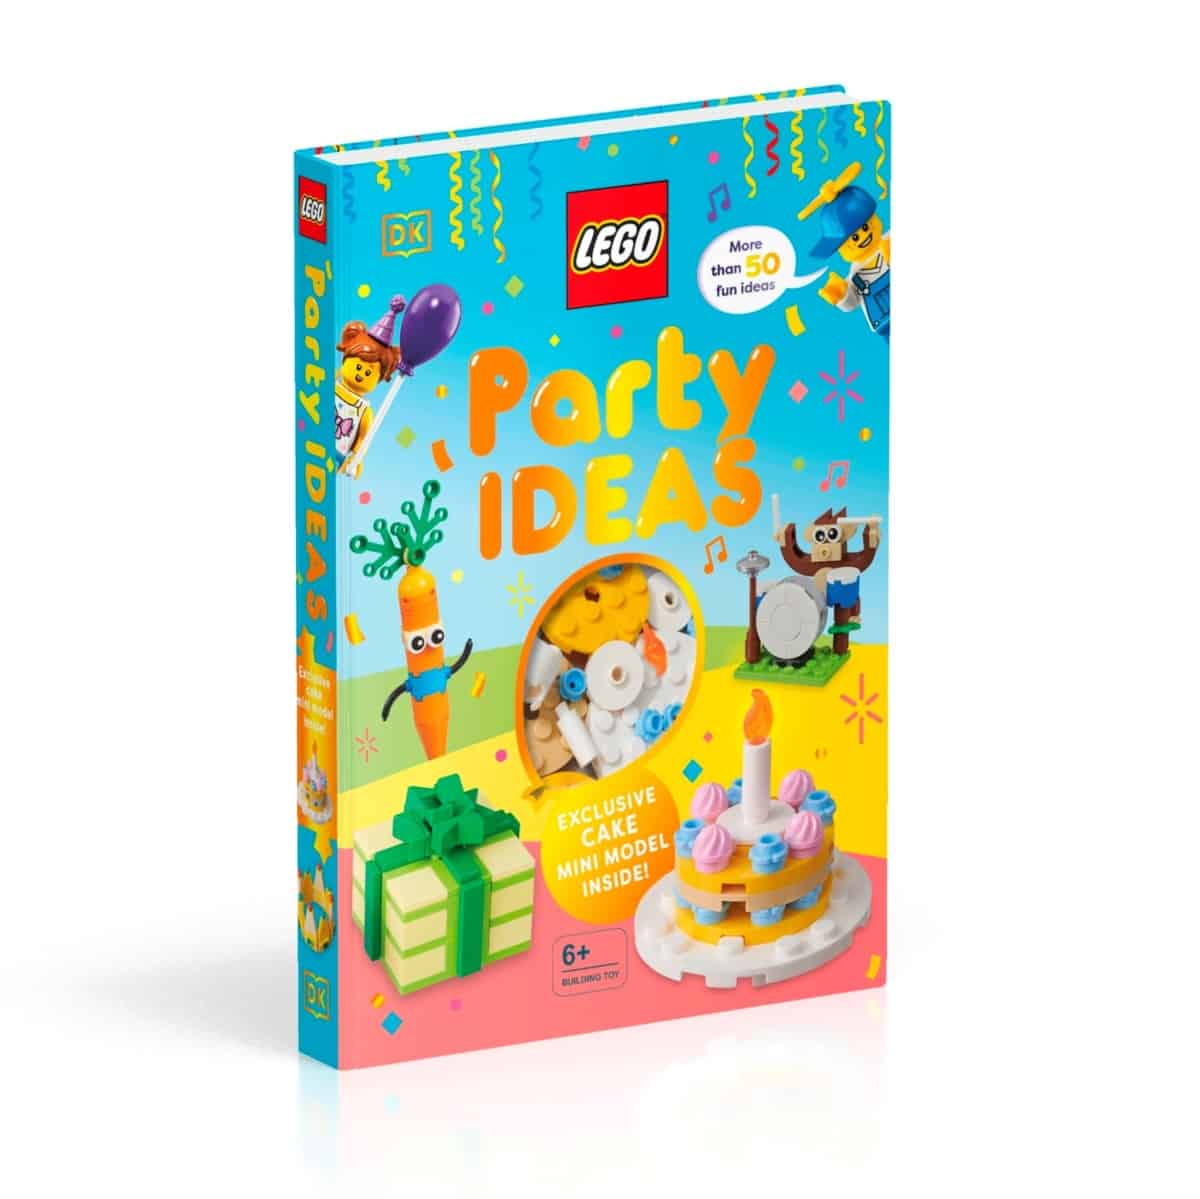 party ideas with exclusive lego cake mini model 5007580